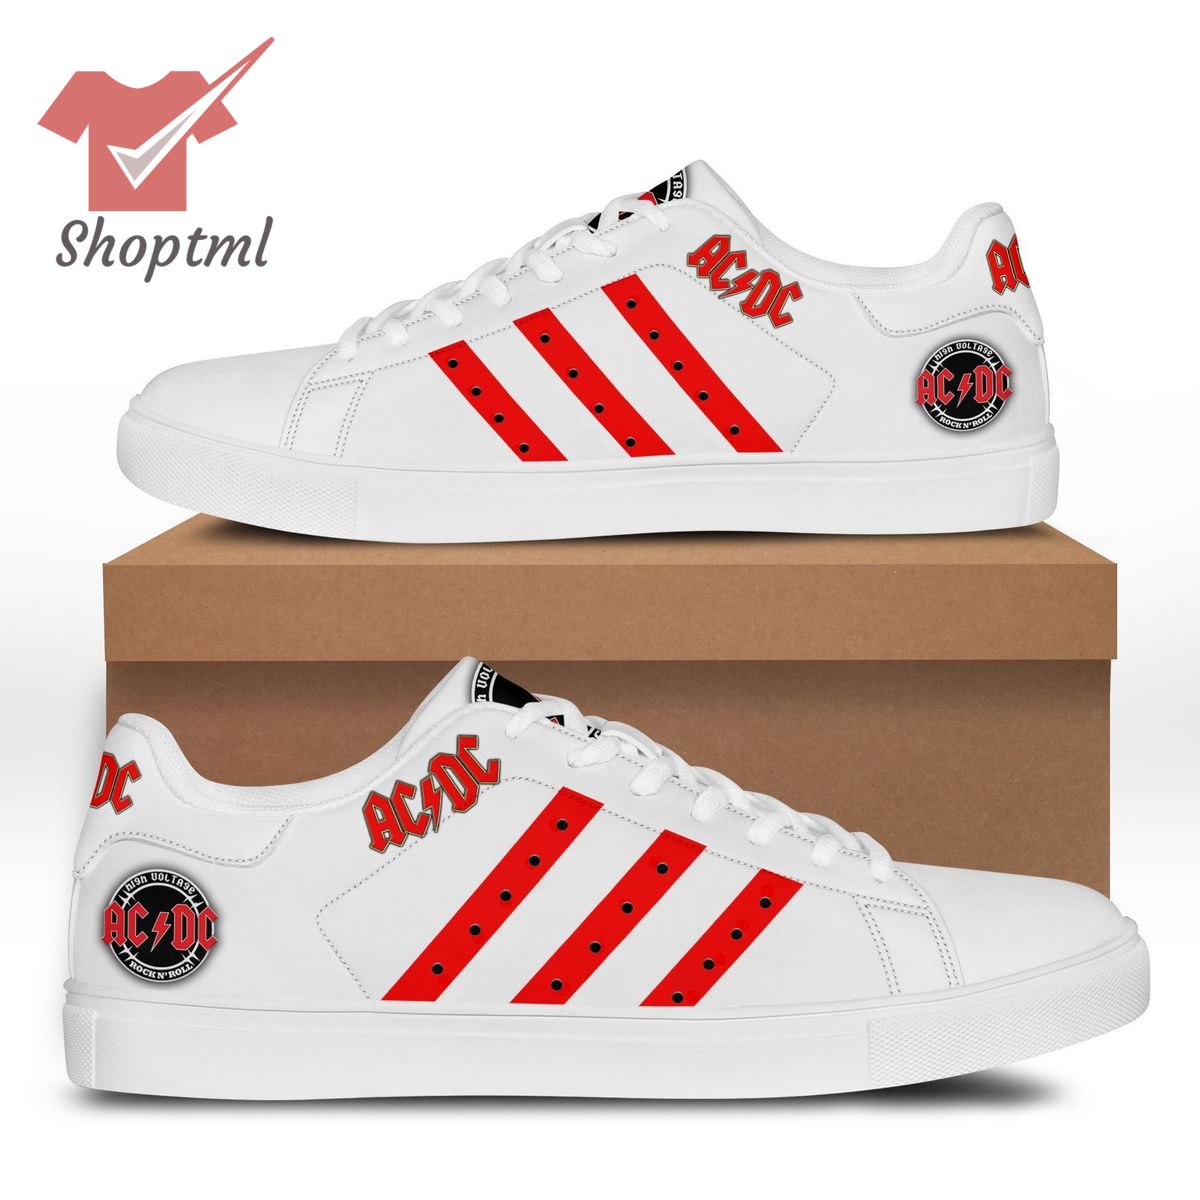 ACDC Band stan smith shoes